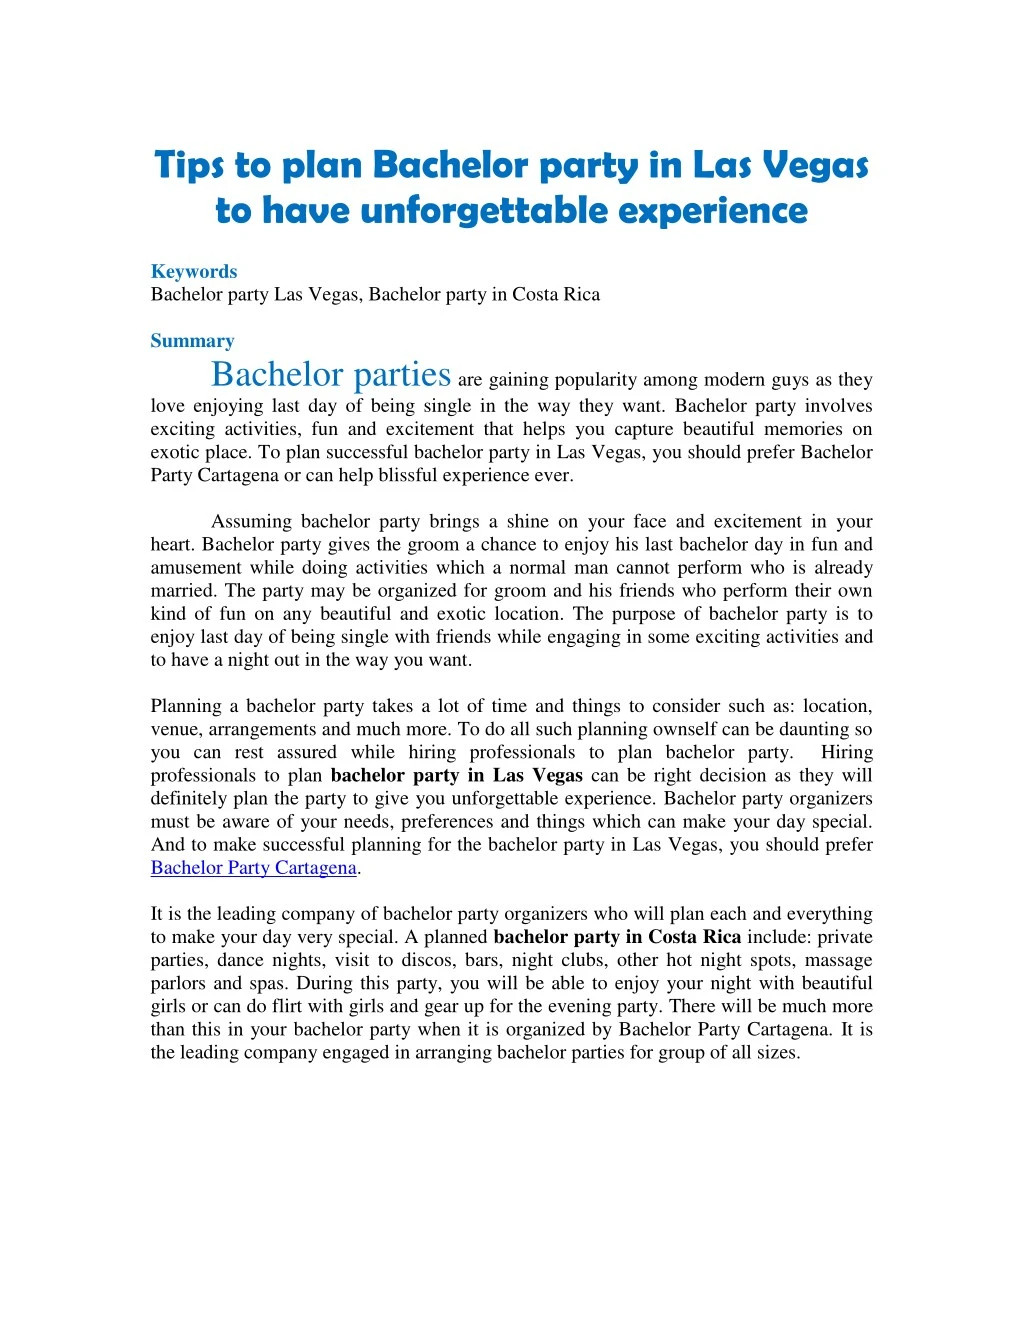 tips to plan bachelor party in las vegas to have